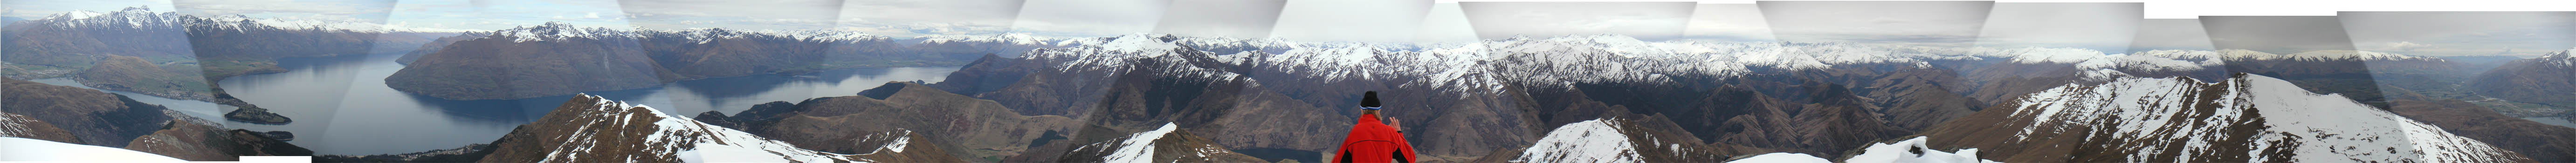 After some doubt and tension, and some guidance from more experienced climbers, we reached the summit!  Here is the awesome 360-degree view from the top!  Queenstown is at the left, followed by the lake, the Remarkables, and a guy from Sweden.  Gotta love random guys from Sweden popping up in your panorama photos...